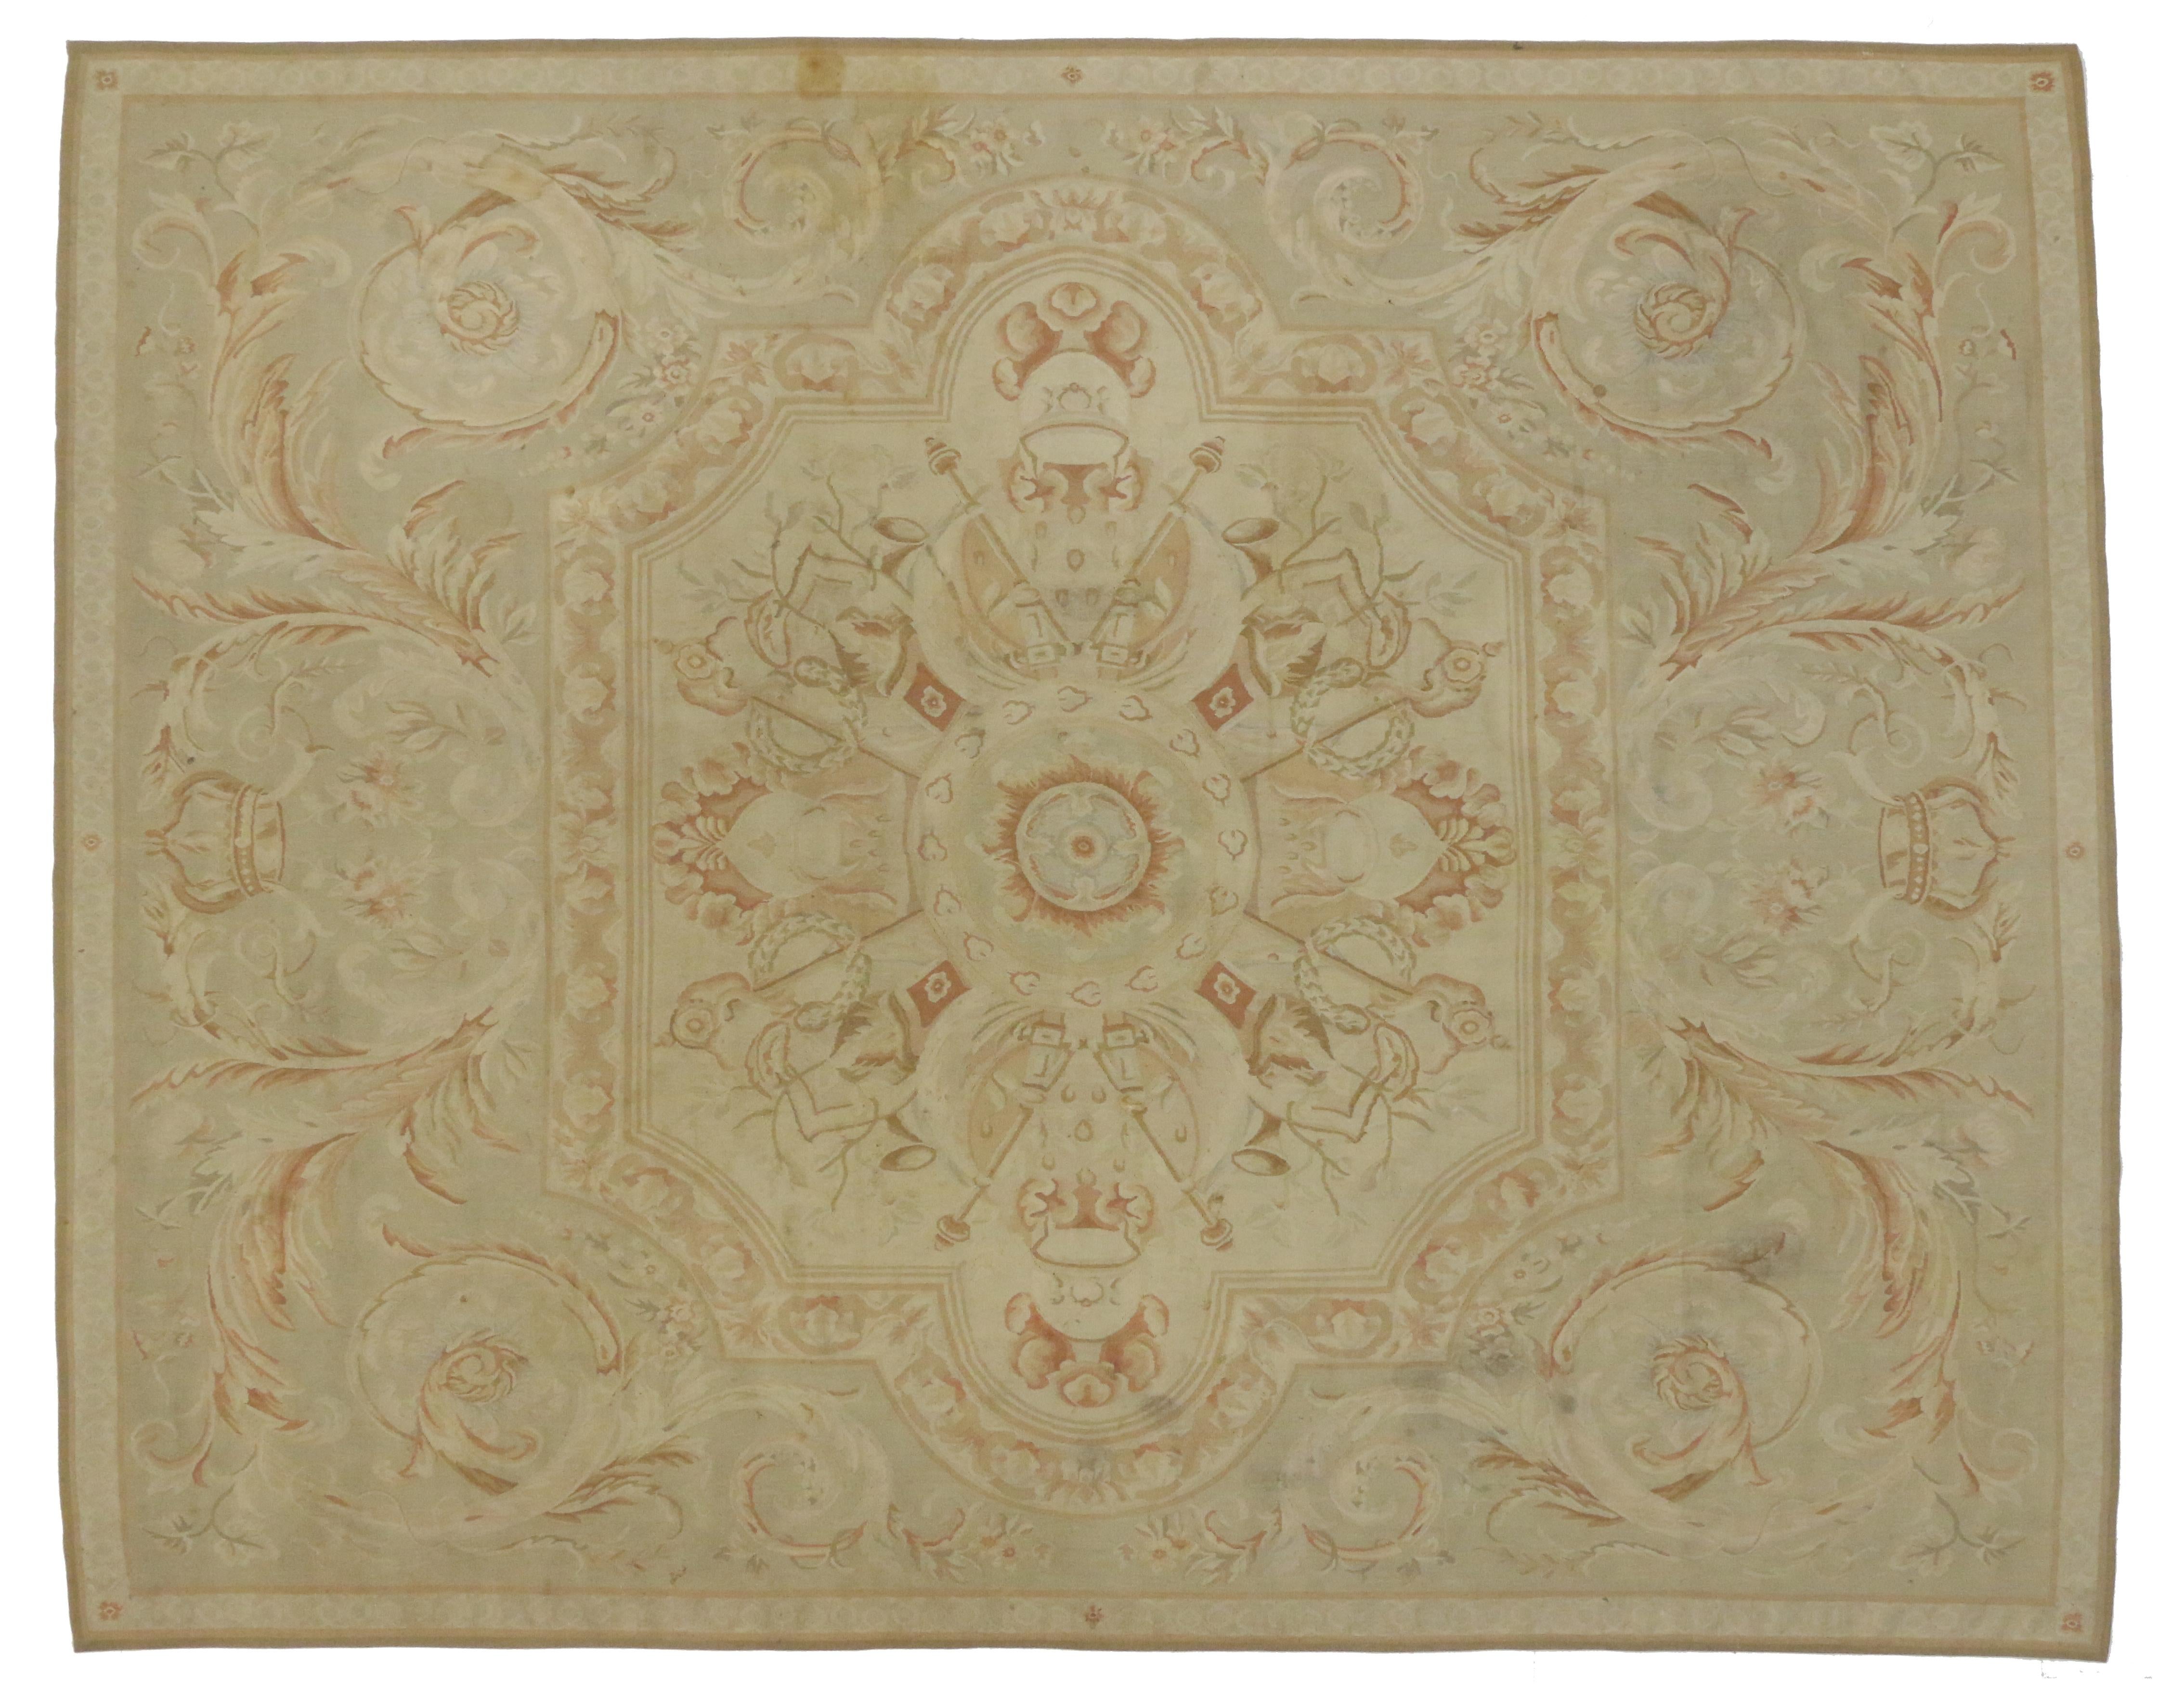 76744 Vintage Aubusson French Provincial Chintz Style Area Rug with Rocaille Design 07'11 x 10'02. Drawing inspiration from Mario Buatta and Chintz style, you can bring the elegance of the 18th century Aubusson style to your home with this vintage